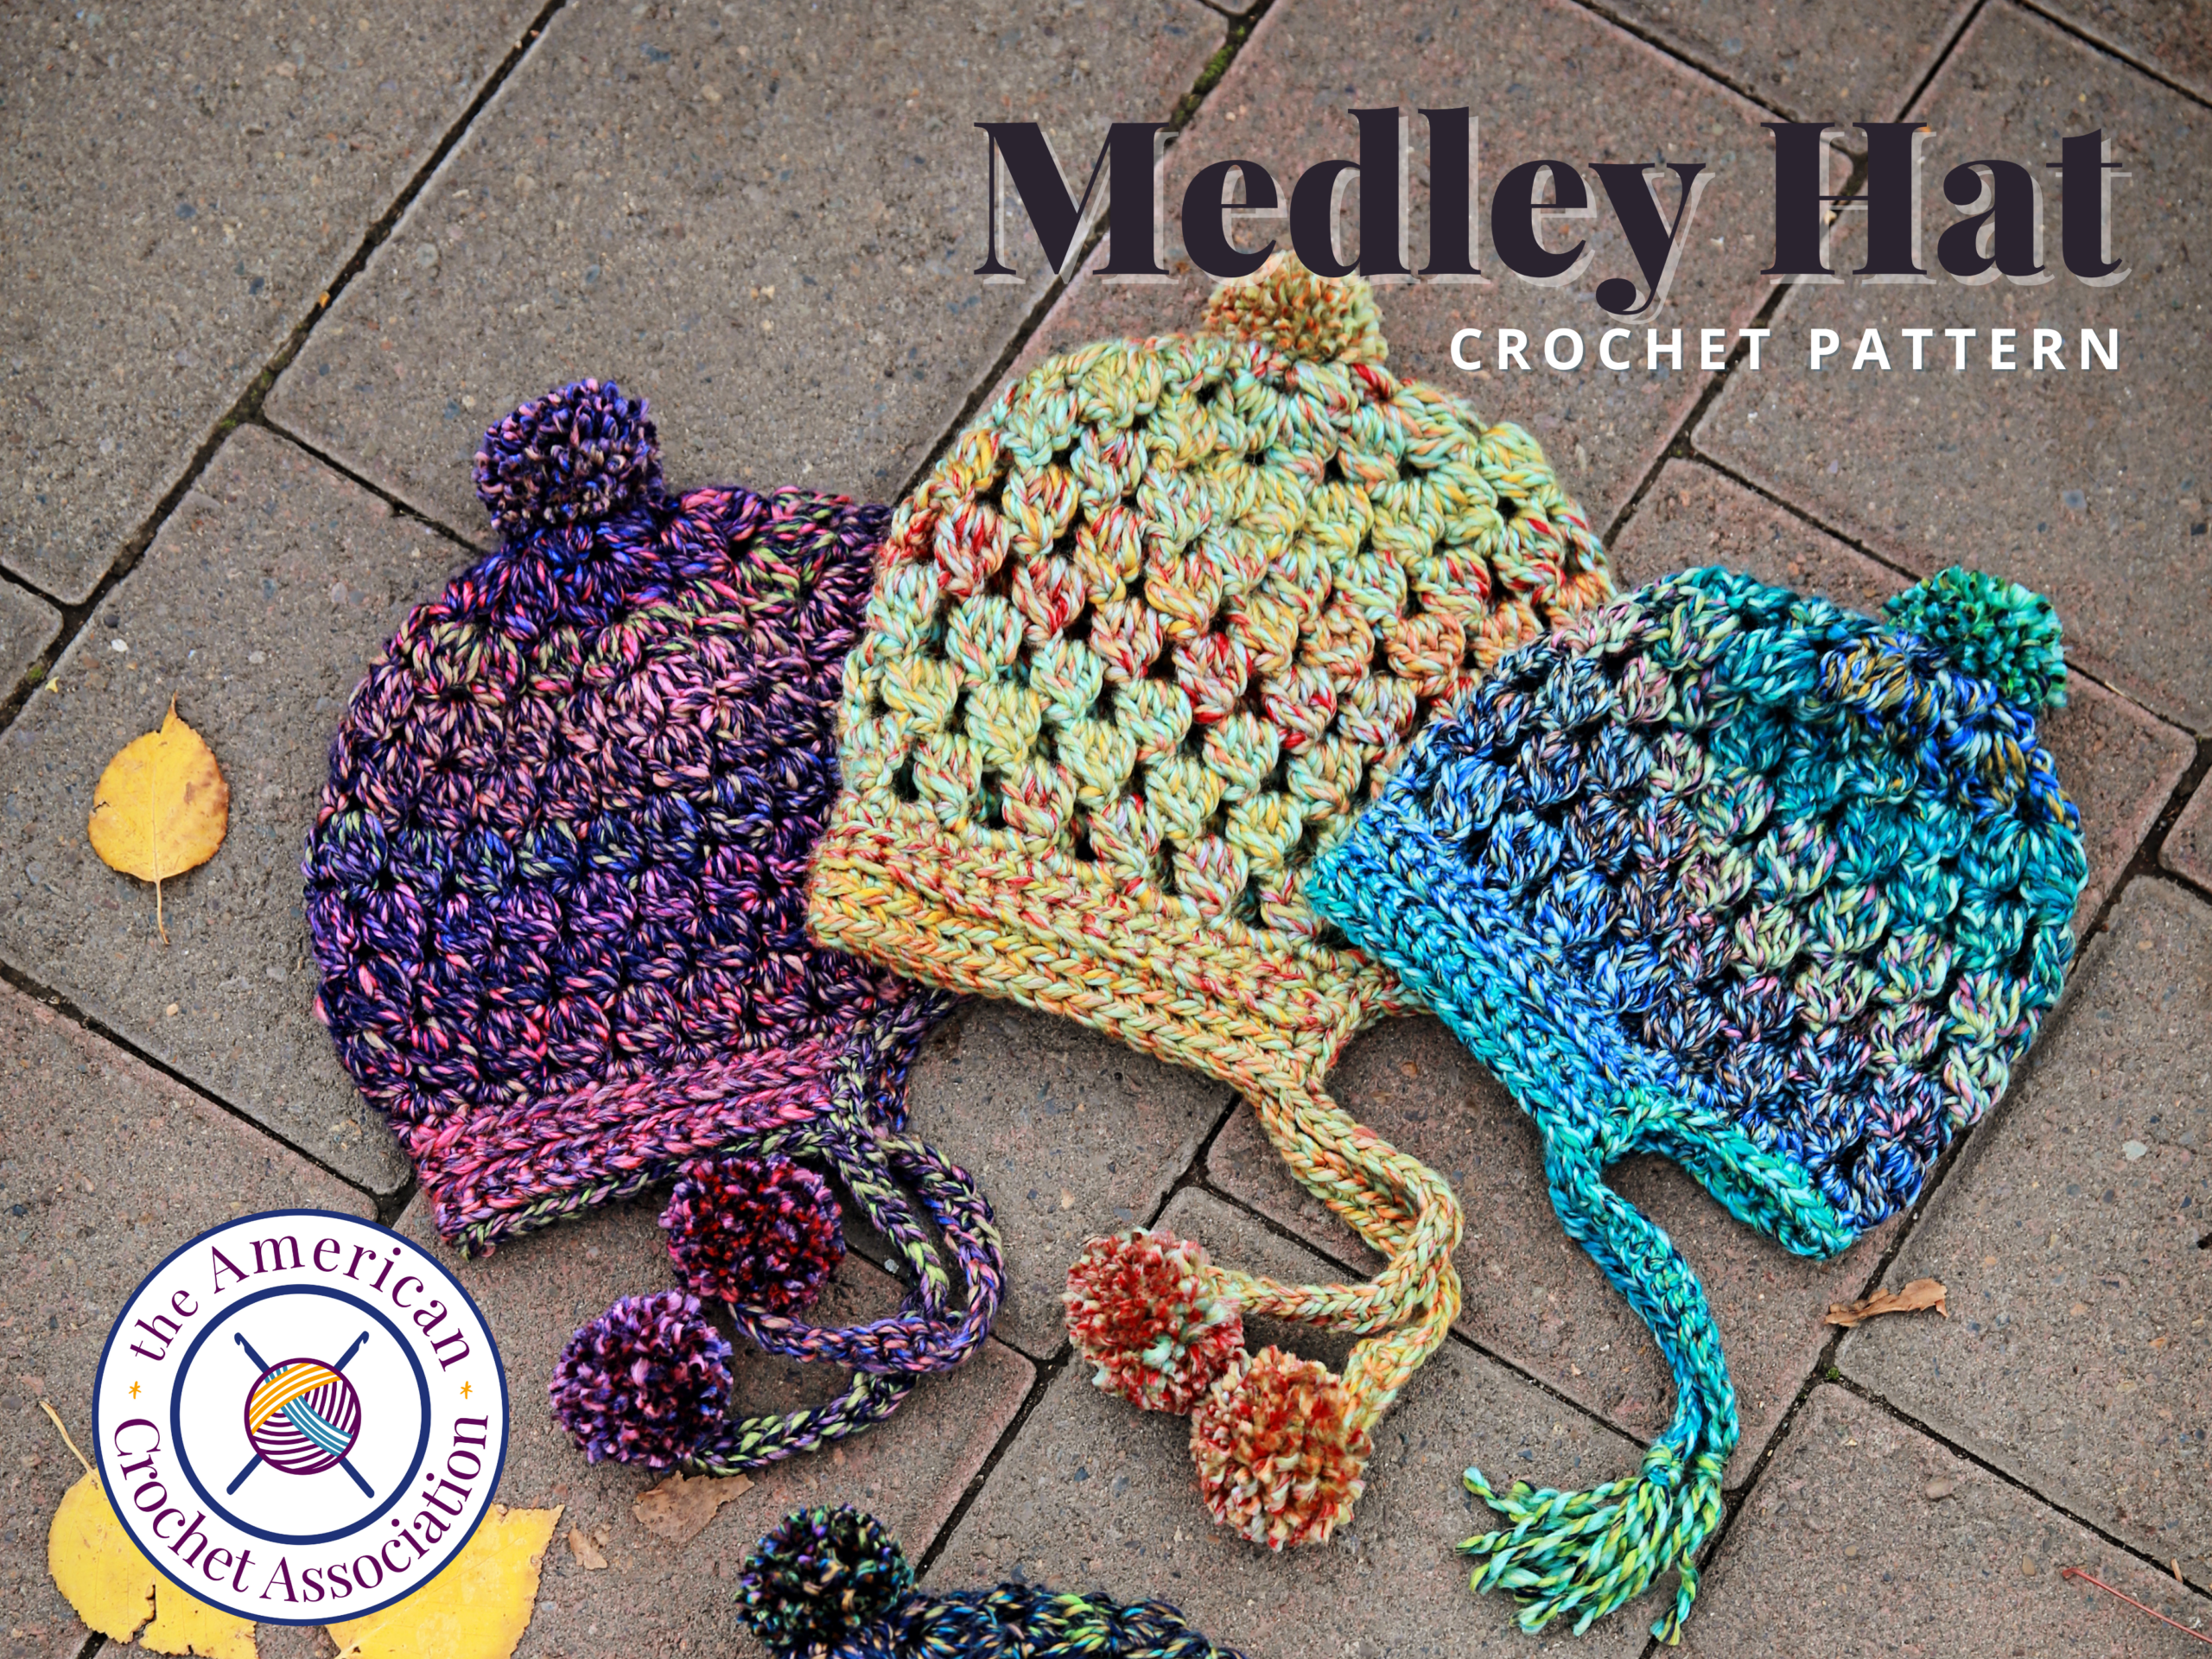 The Medley Crochet hat can be worked in 4 different sizes: 16”, 20”, 24” around!